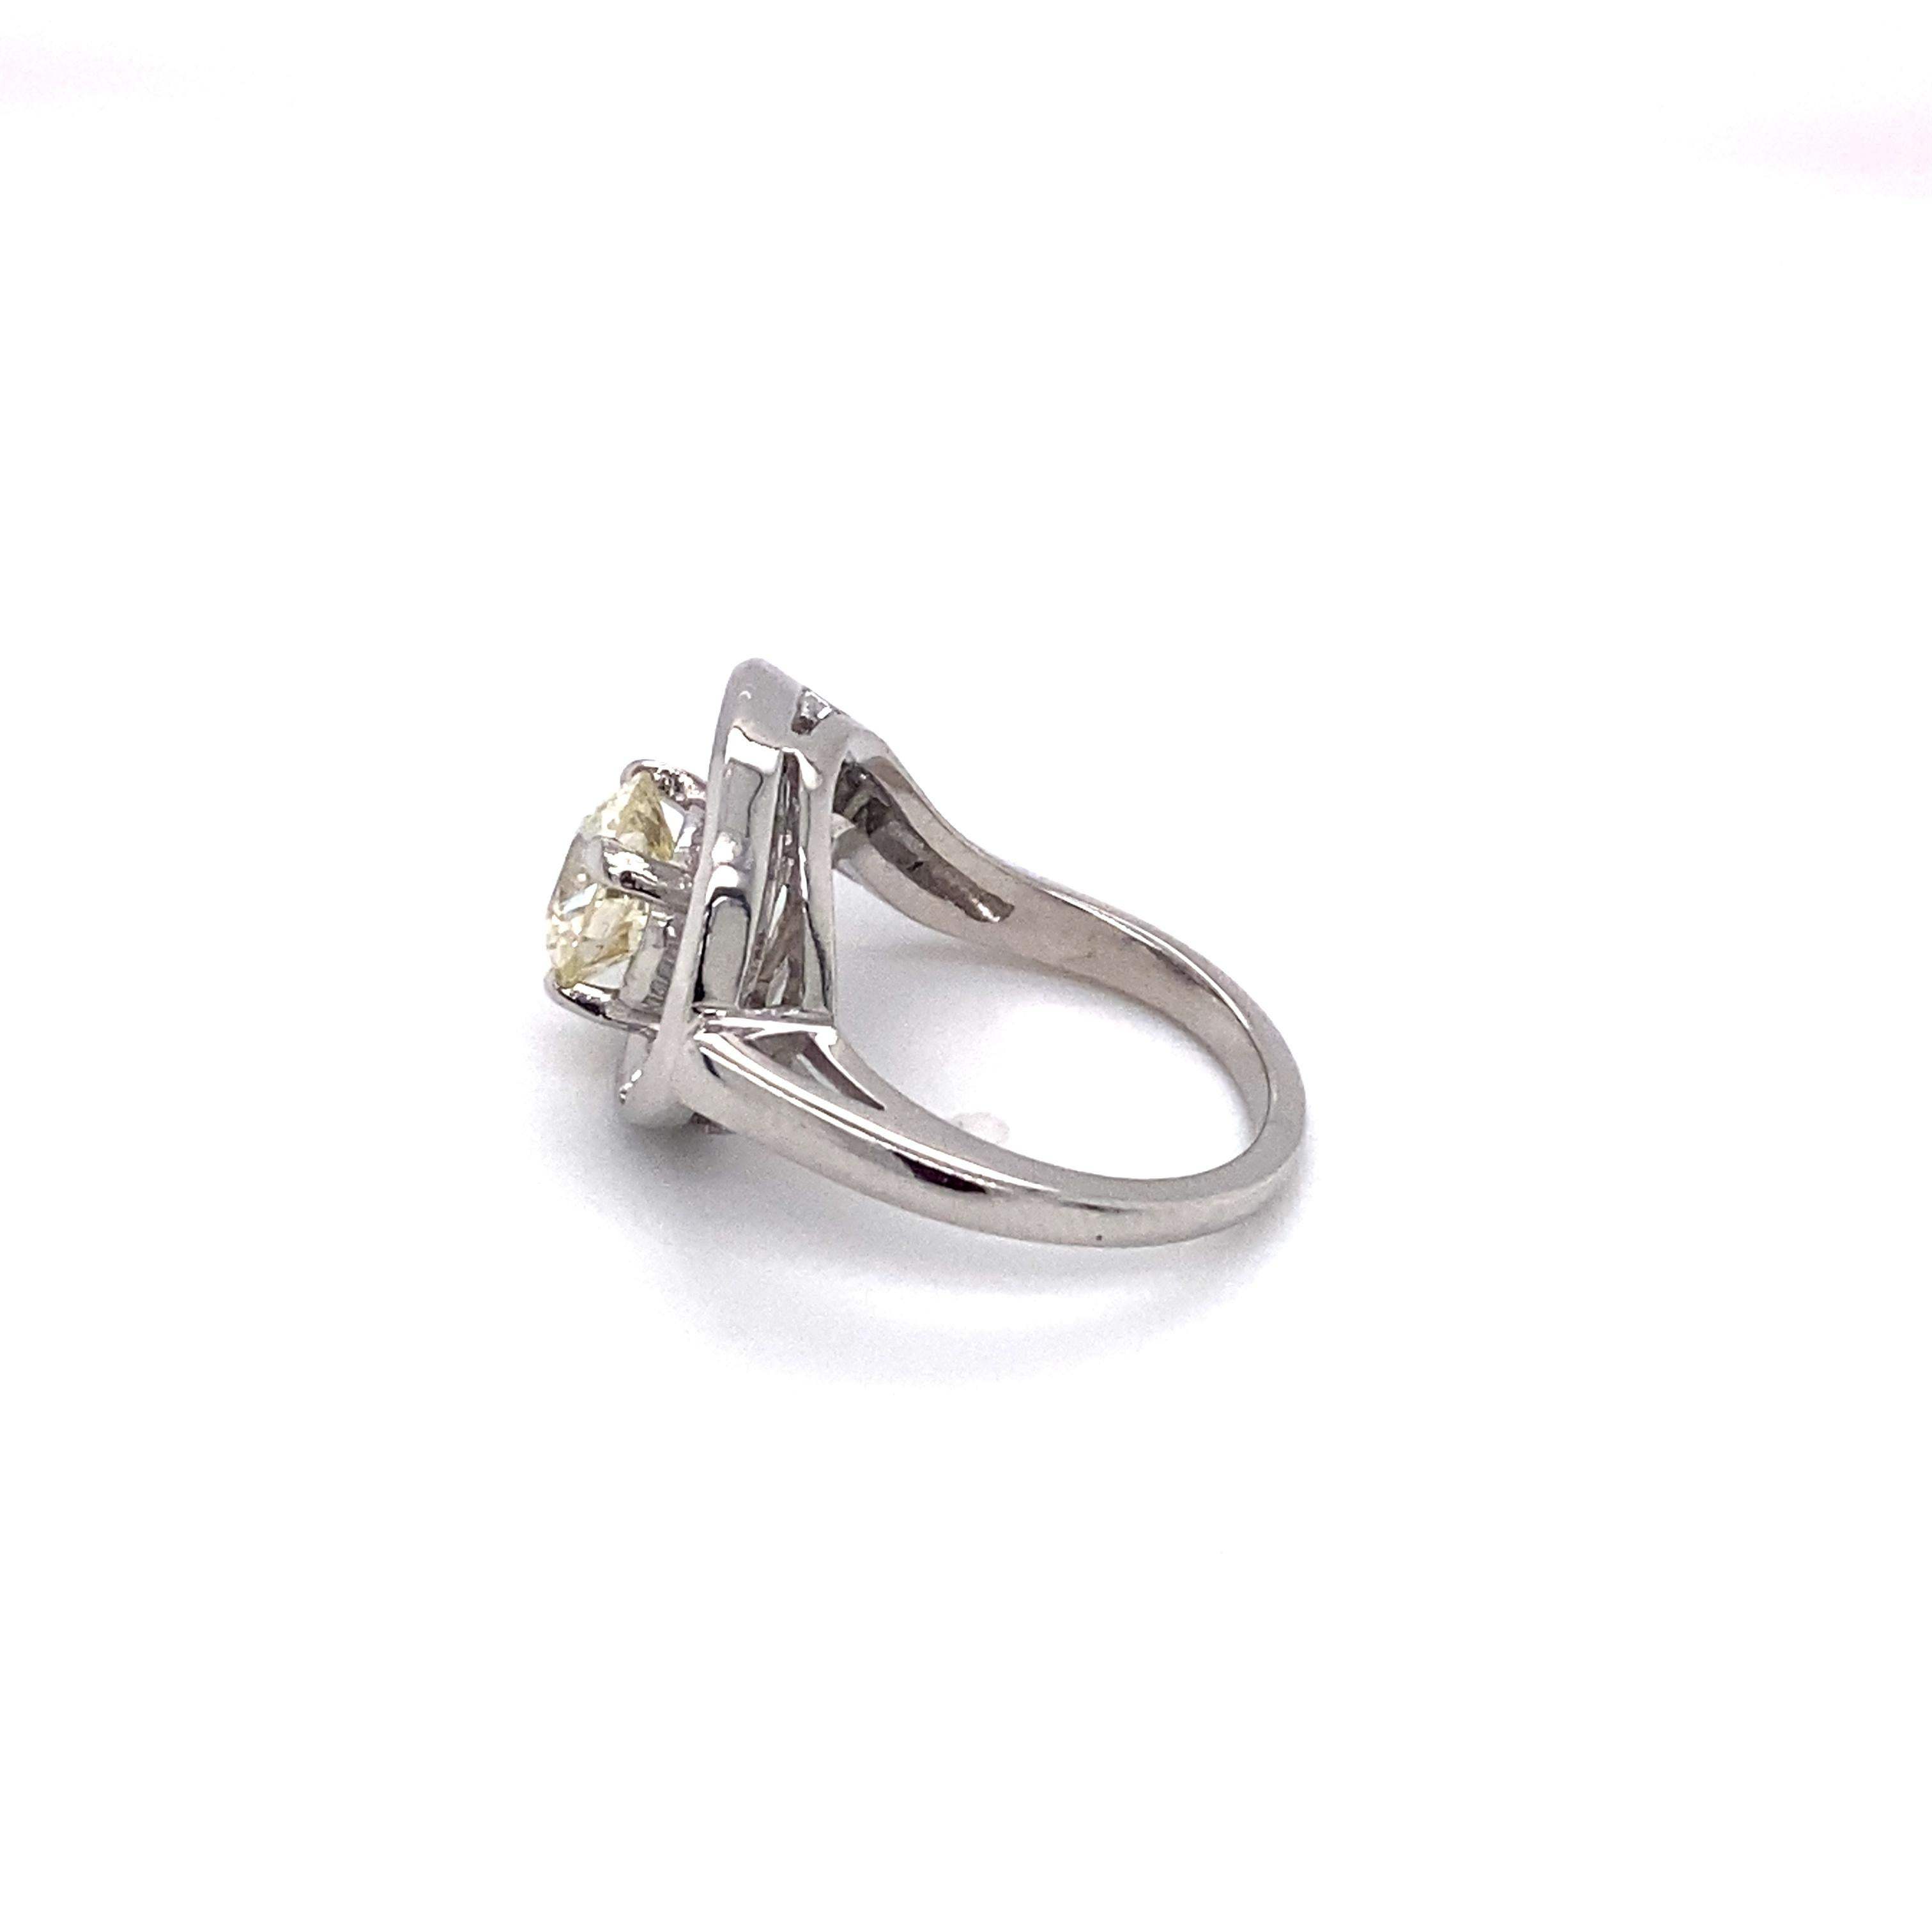 1950s automobile design inspired ring